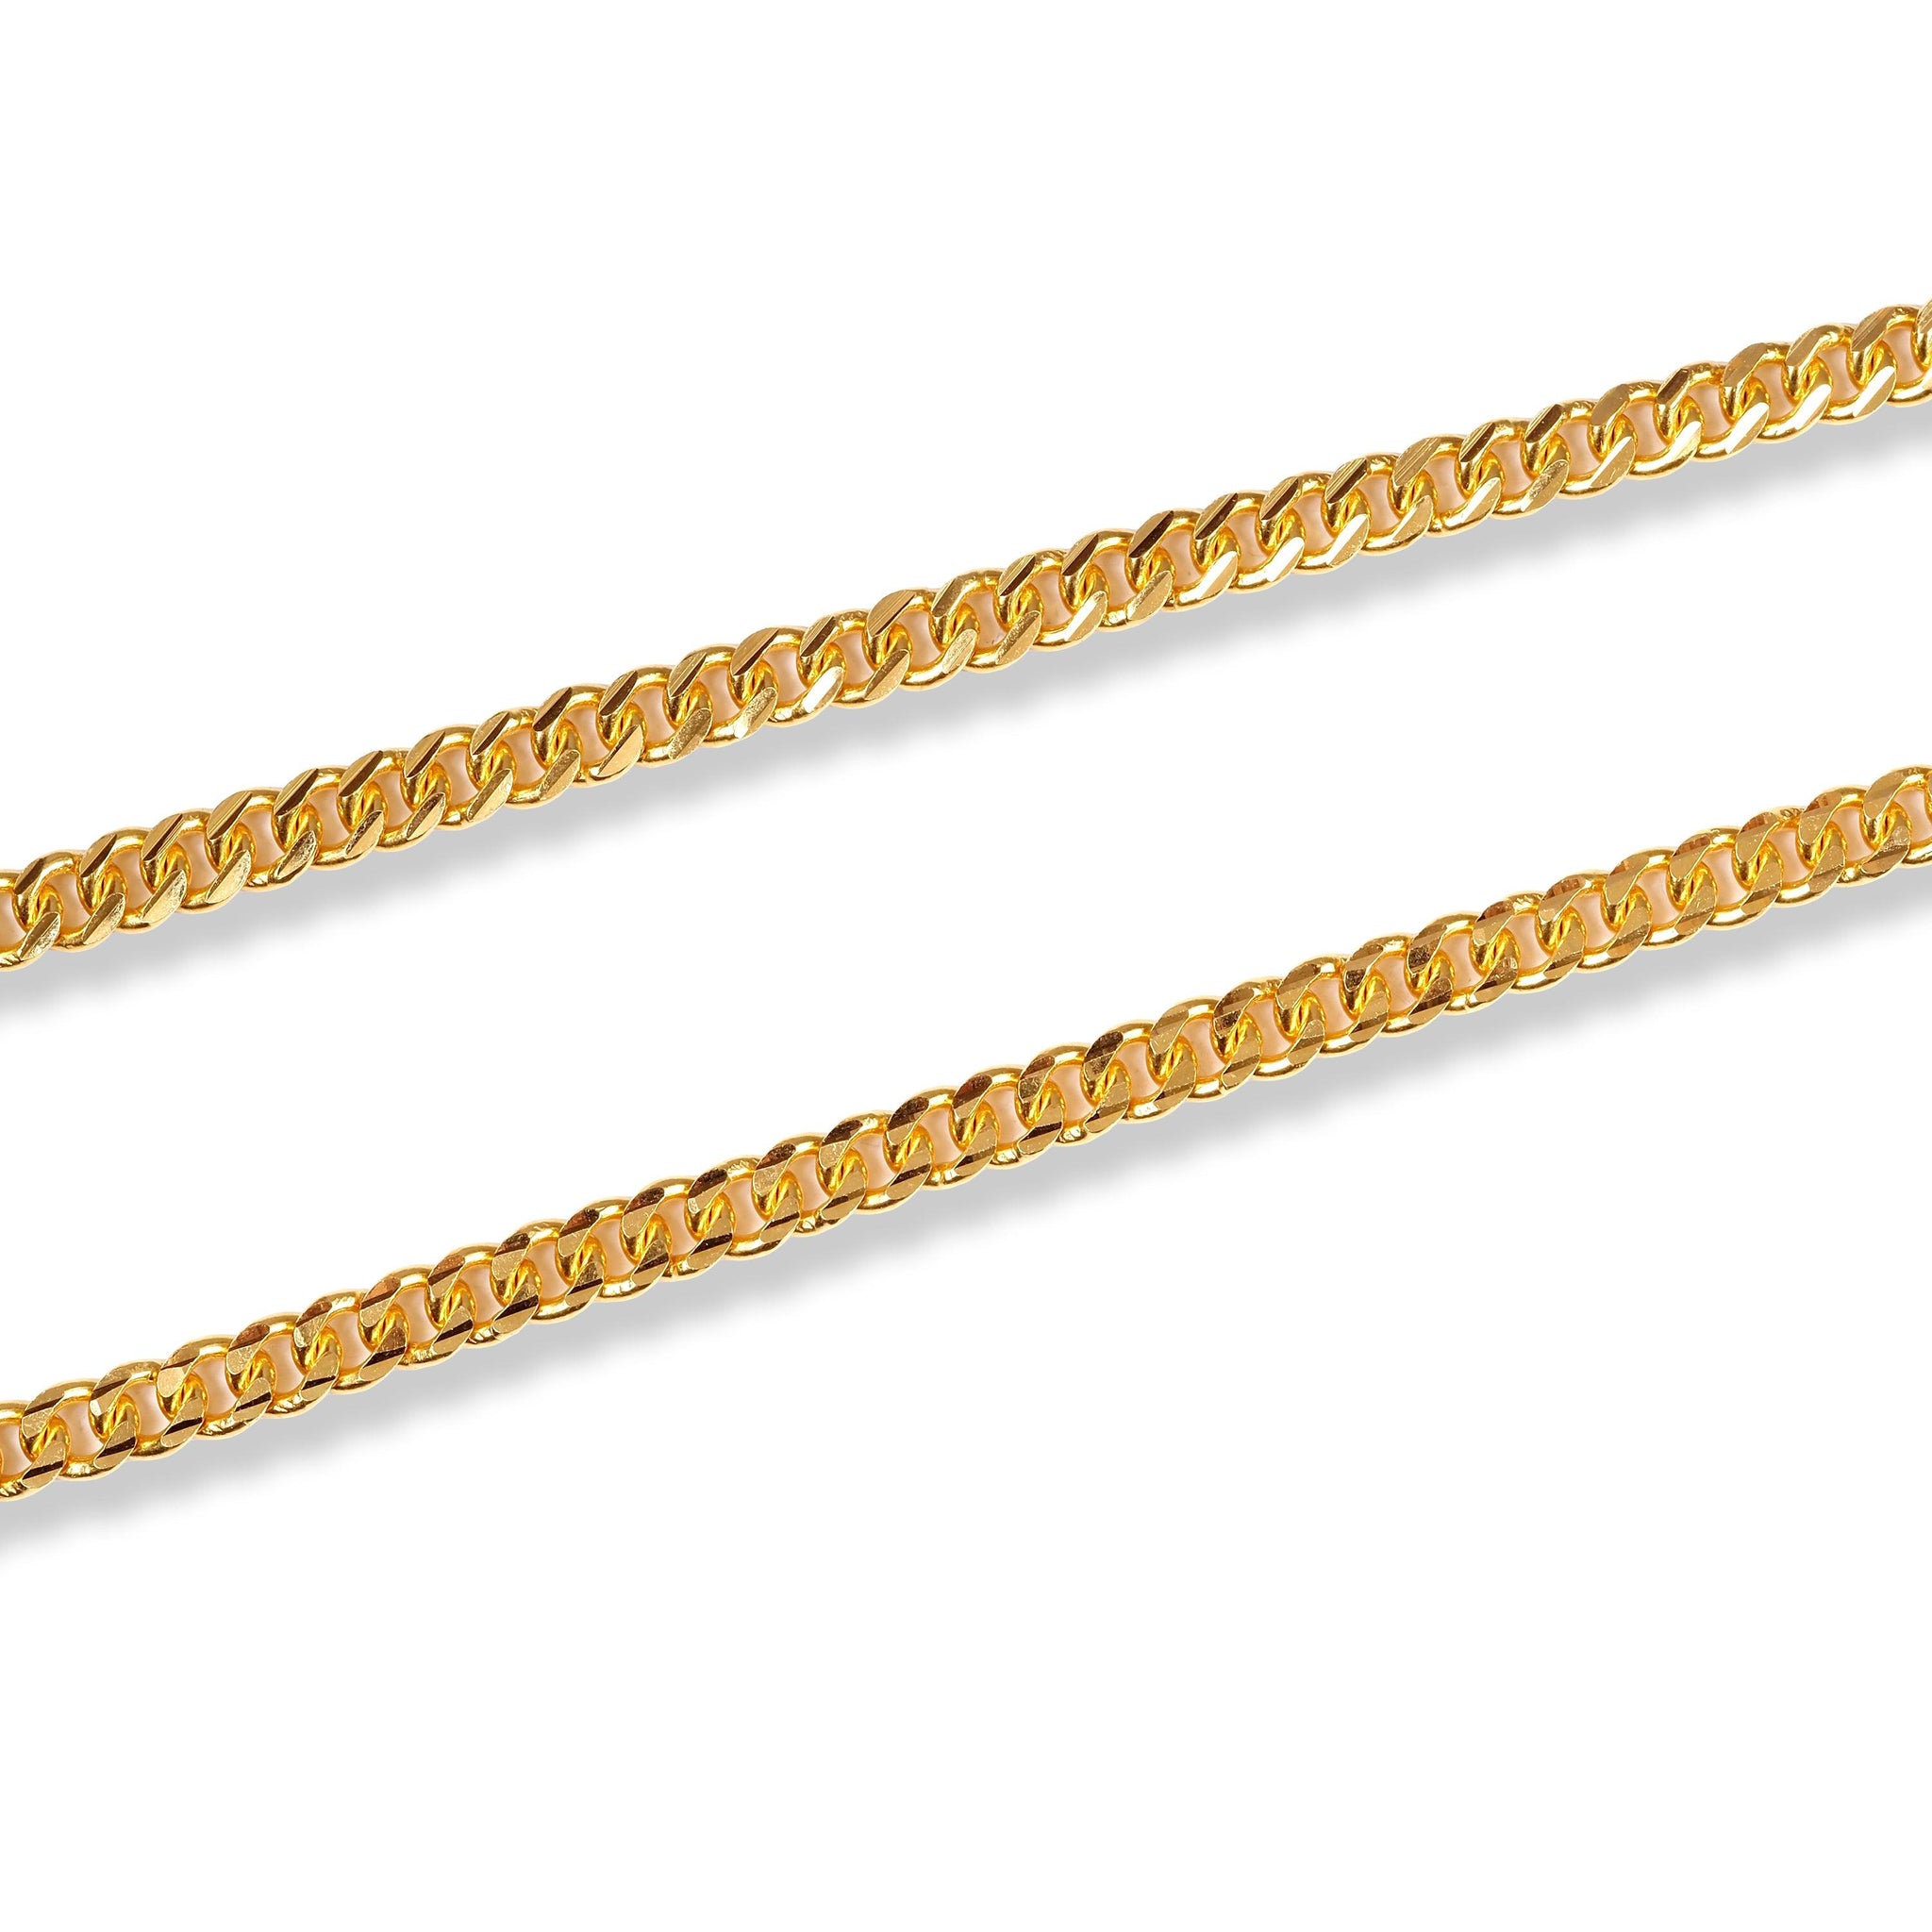 22ct Yellow Gold Classic Curb Link Chain with S Clasp C-1218